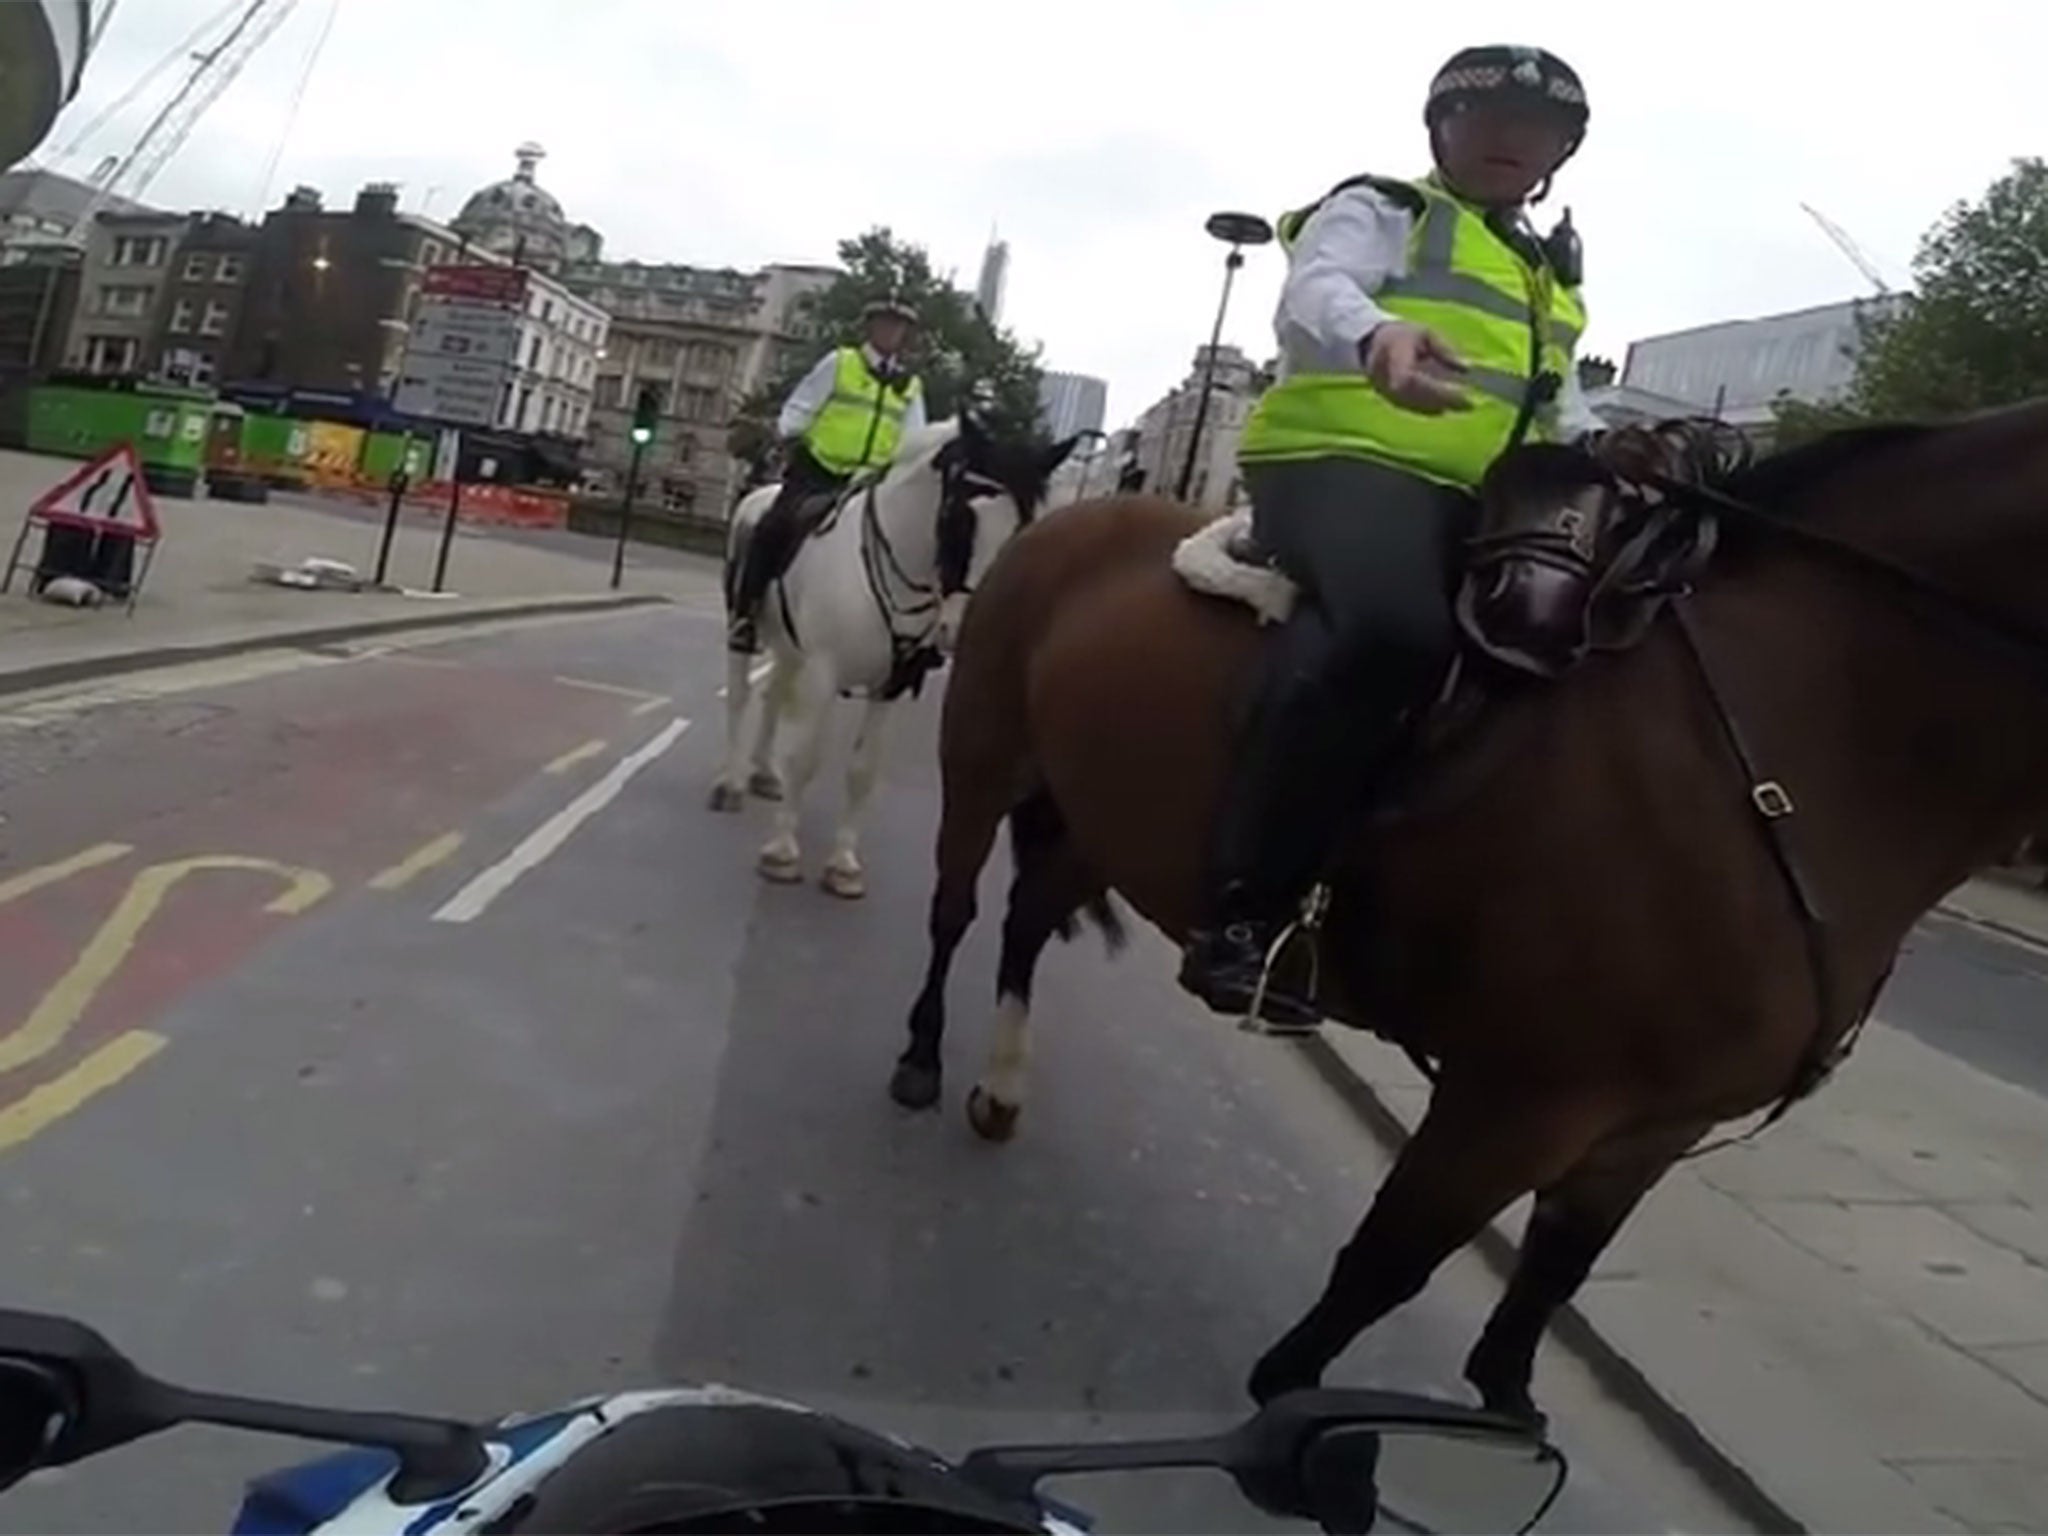 Watch a mounted police officer give a motorcyclist a telling off for pulling a wheelie.